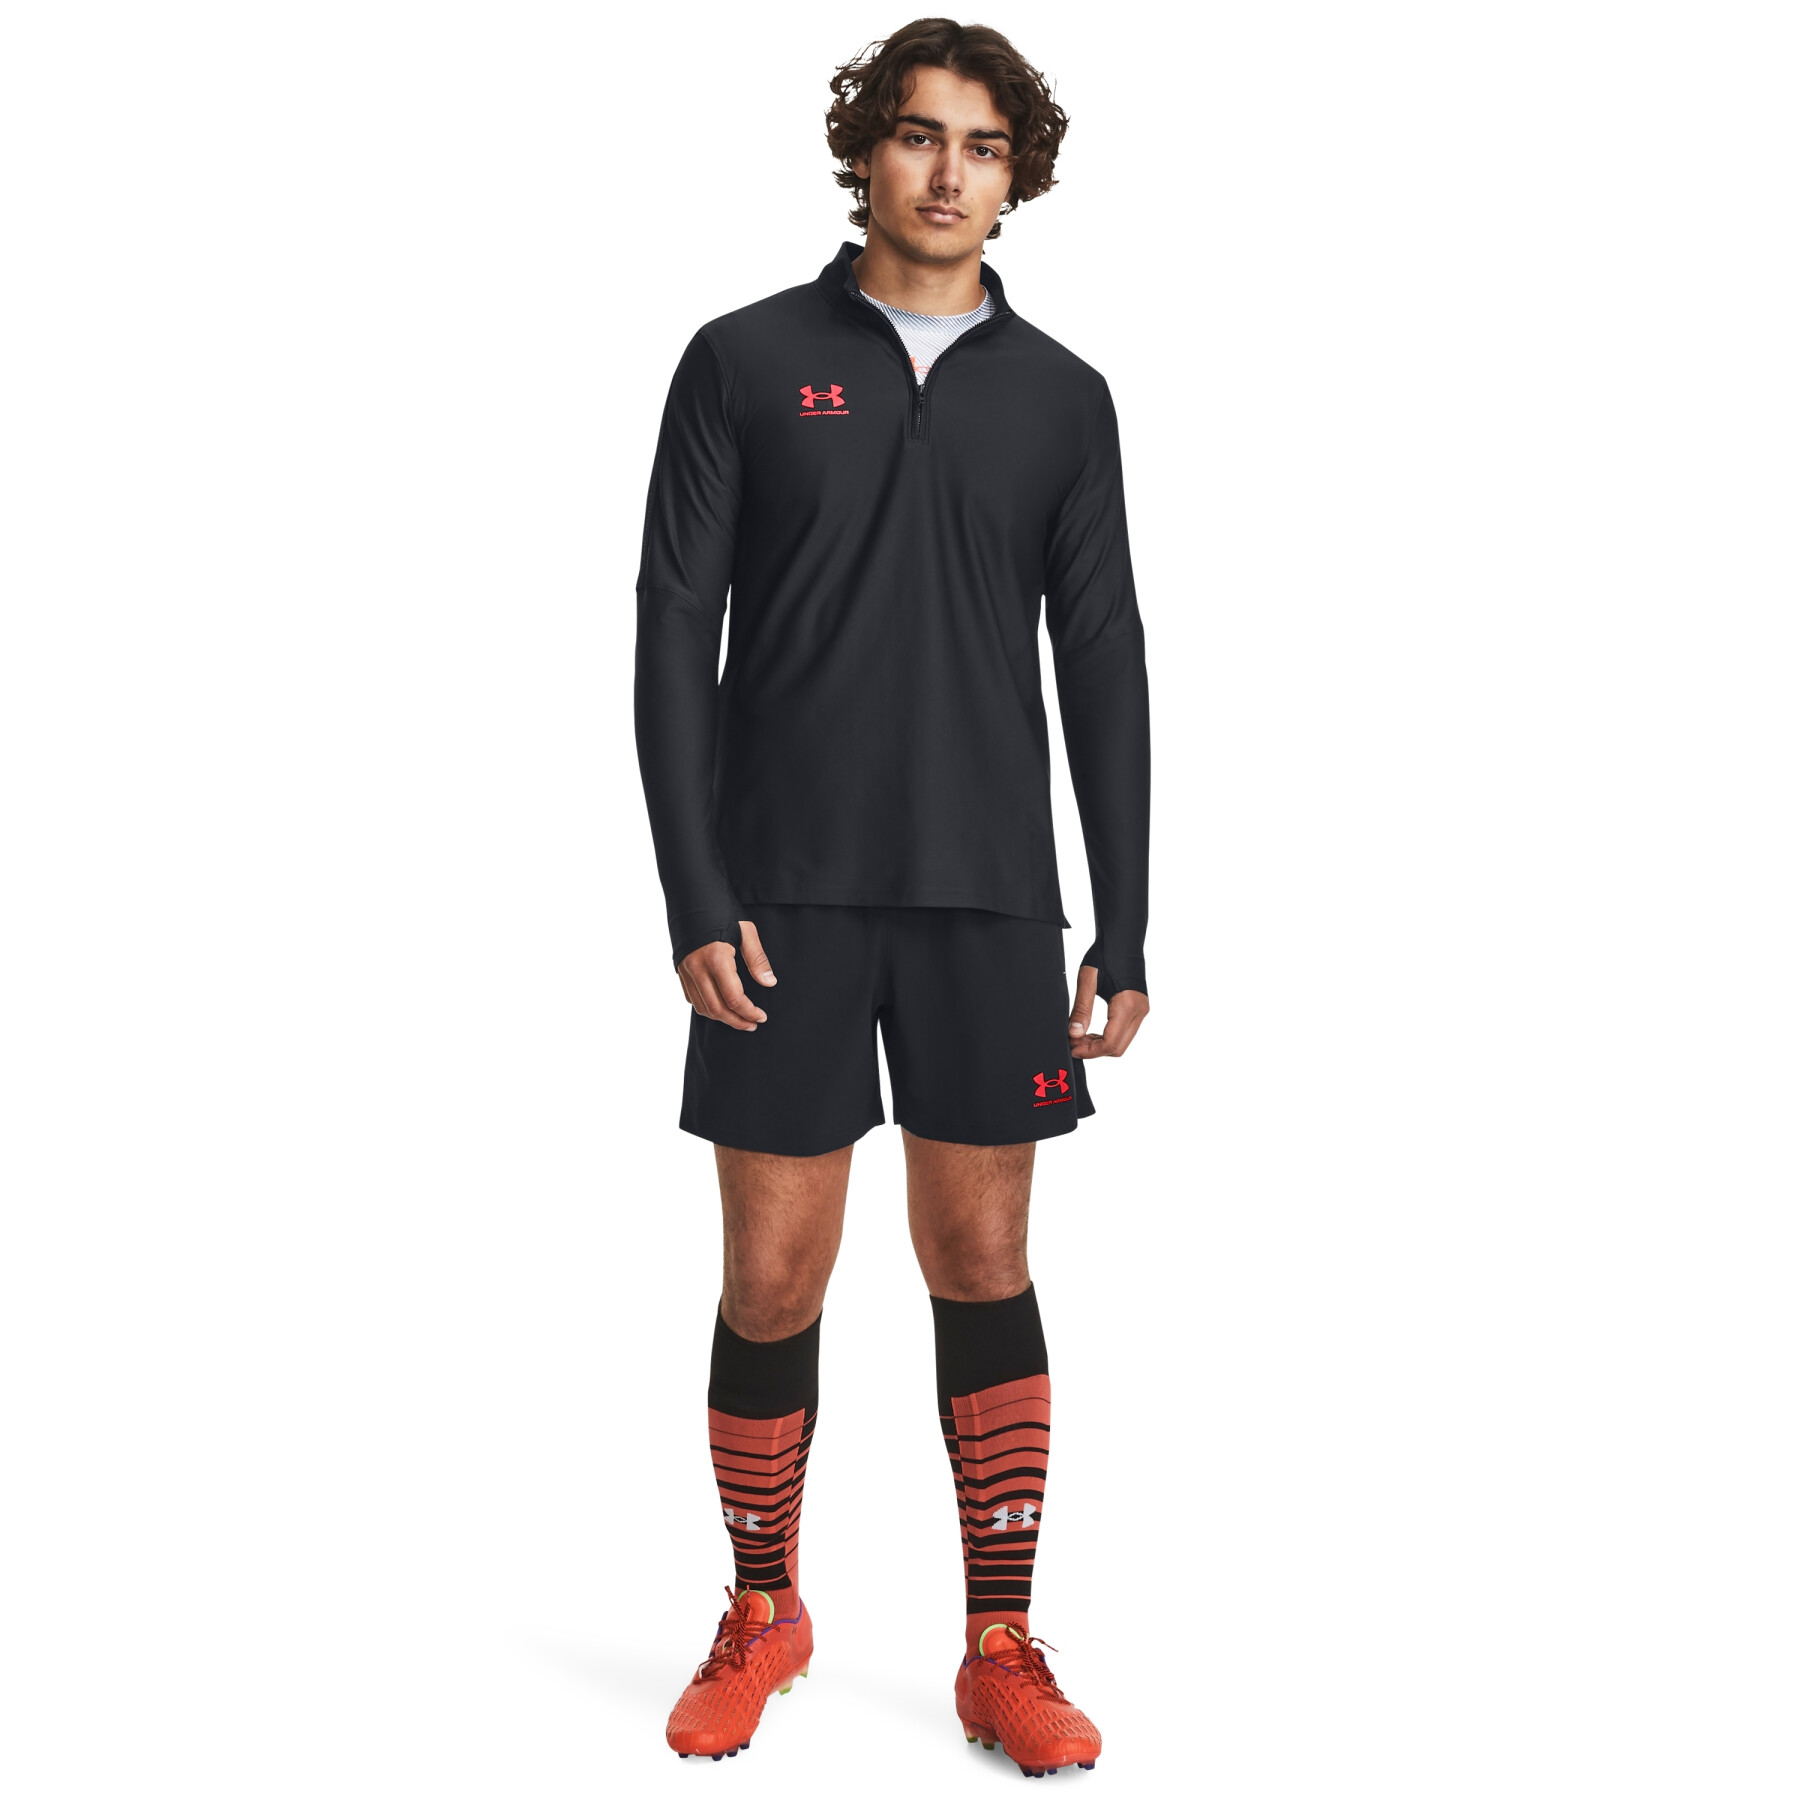 Maillot manches longues 1/4 zip Under Armour Challenger Pro